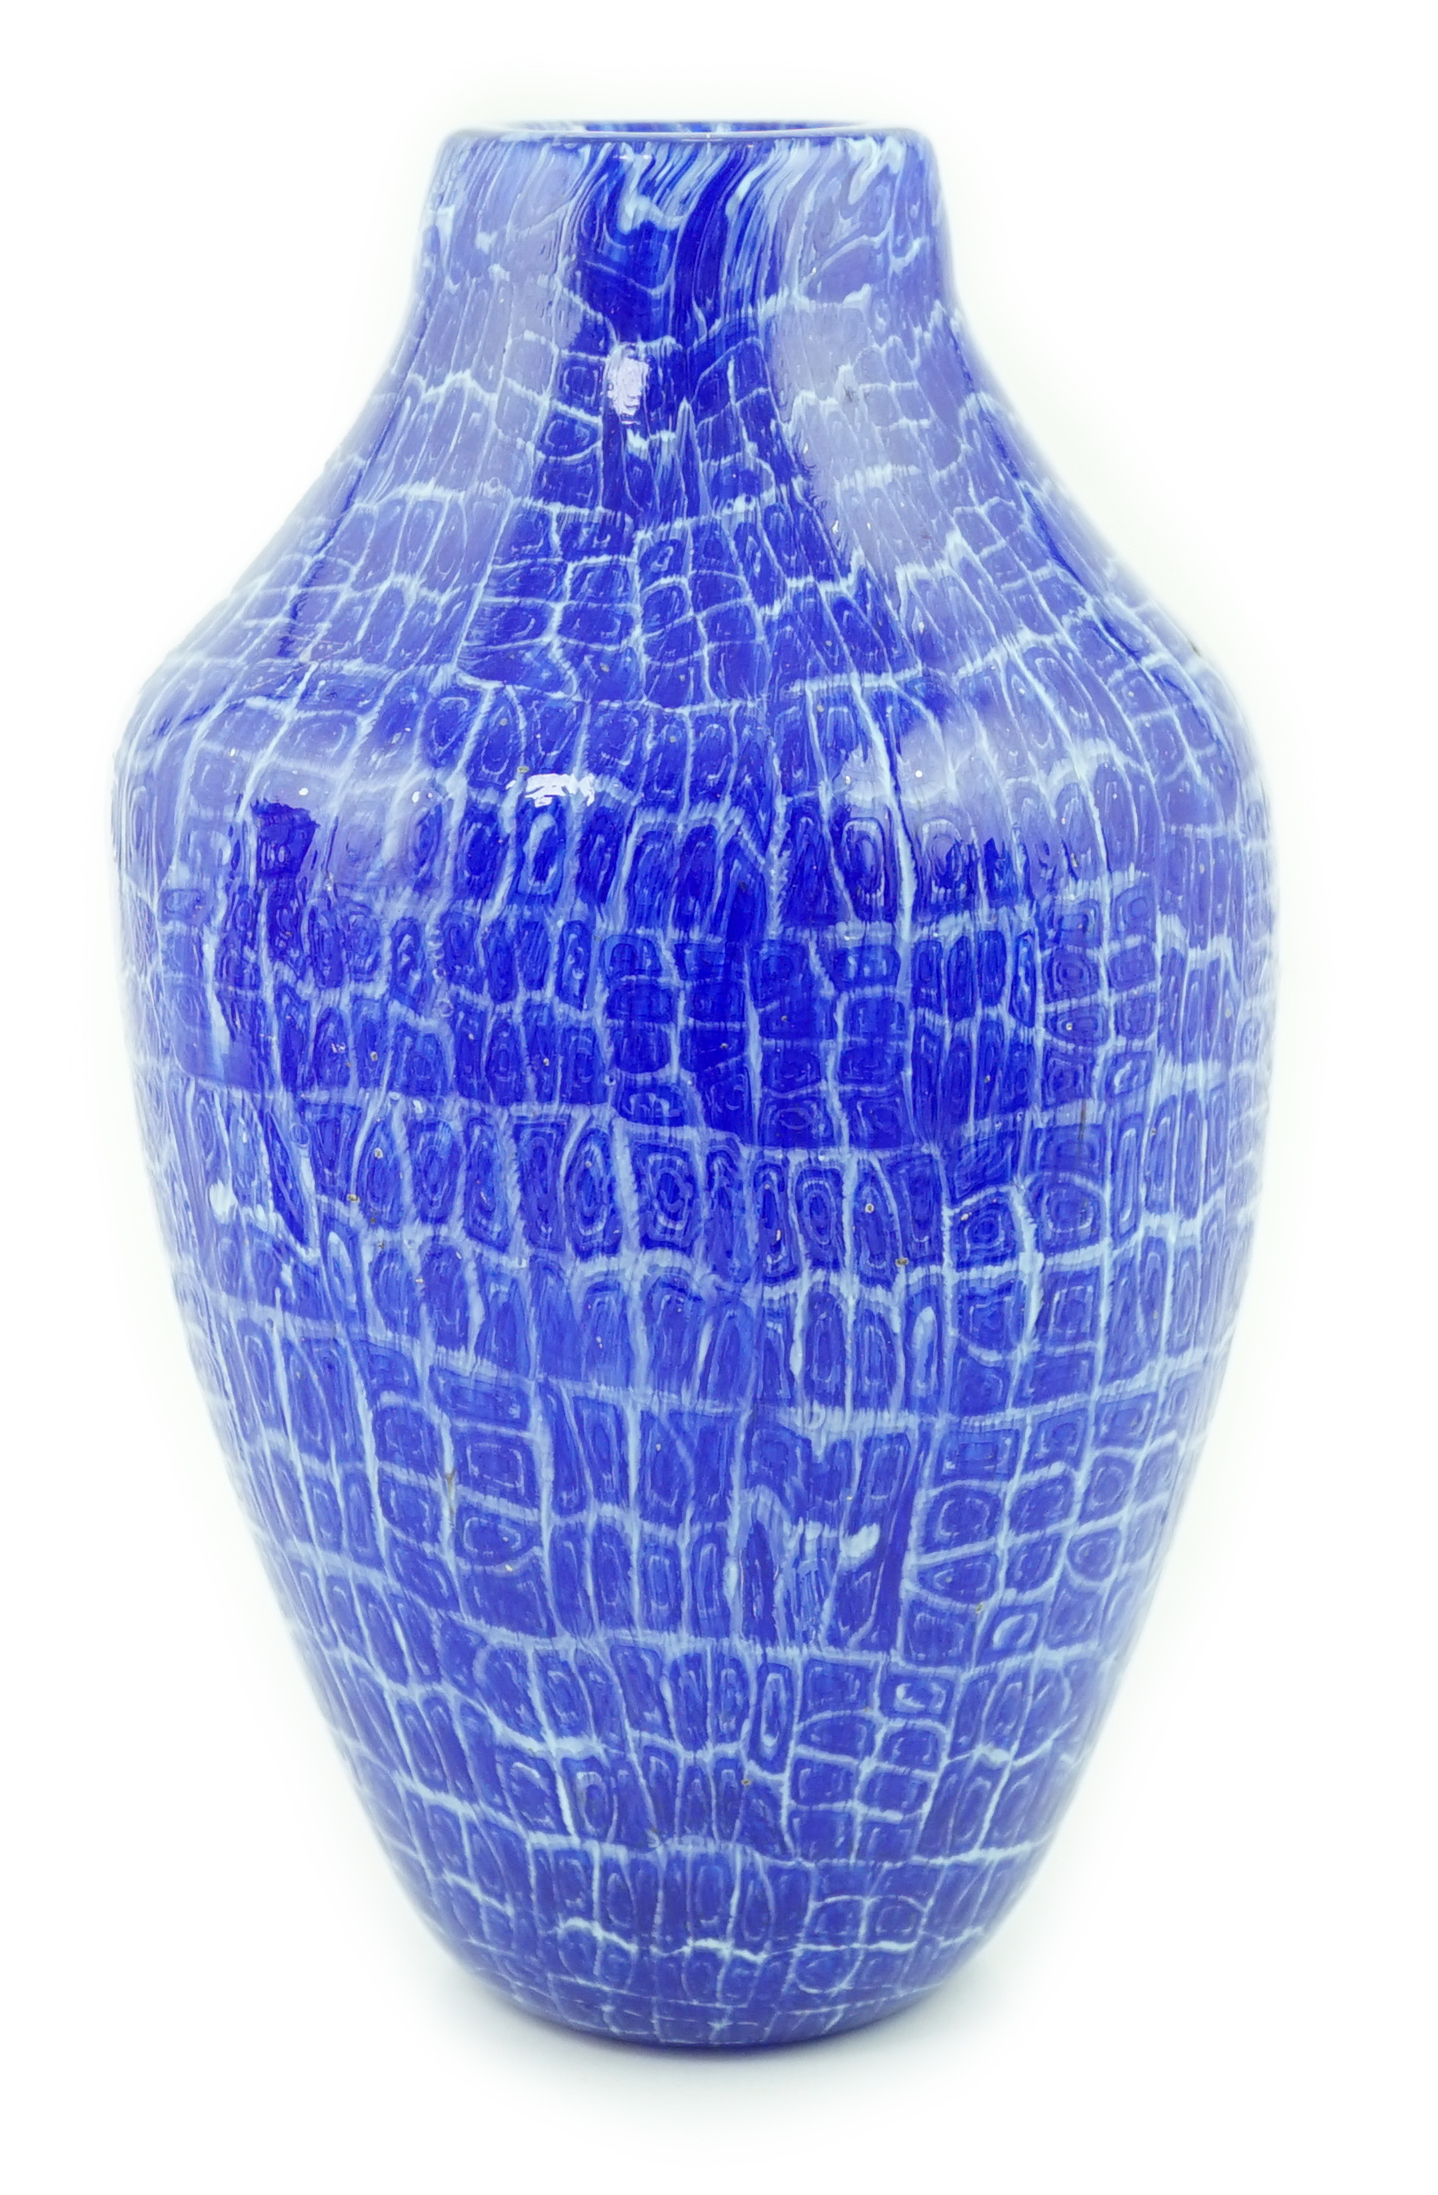 Vittorio Ferro (1932-2012) A Murano glass vase, high shouldered, with a bright blue tile pattern, unsigned, 26cm, Please note this lot attracts an additional import tax of 20% on the hammer price